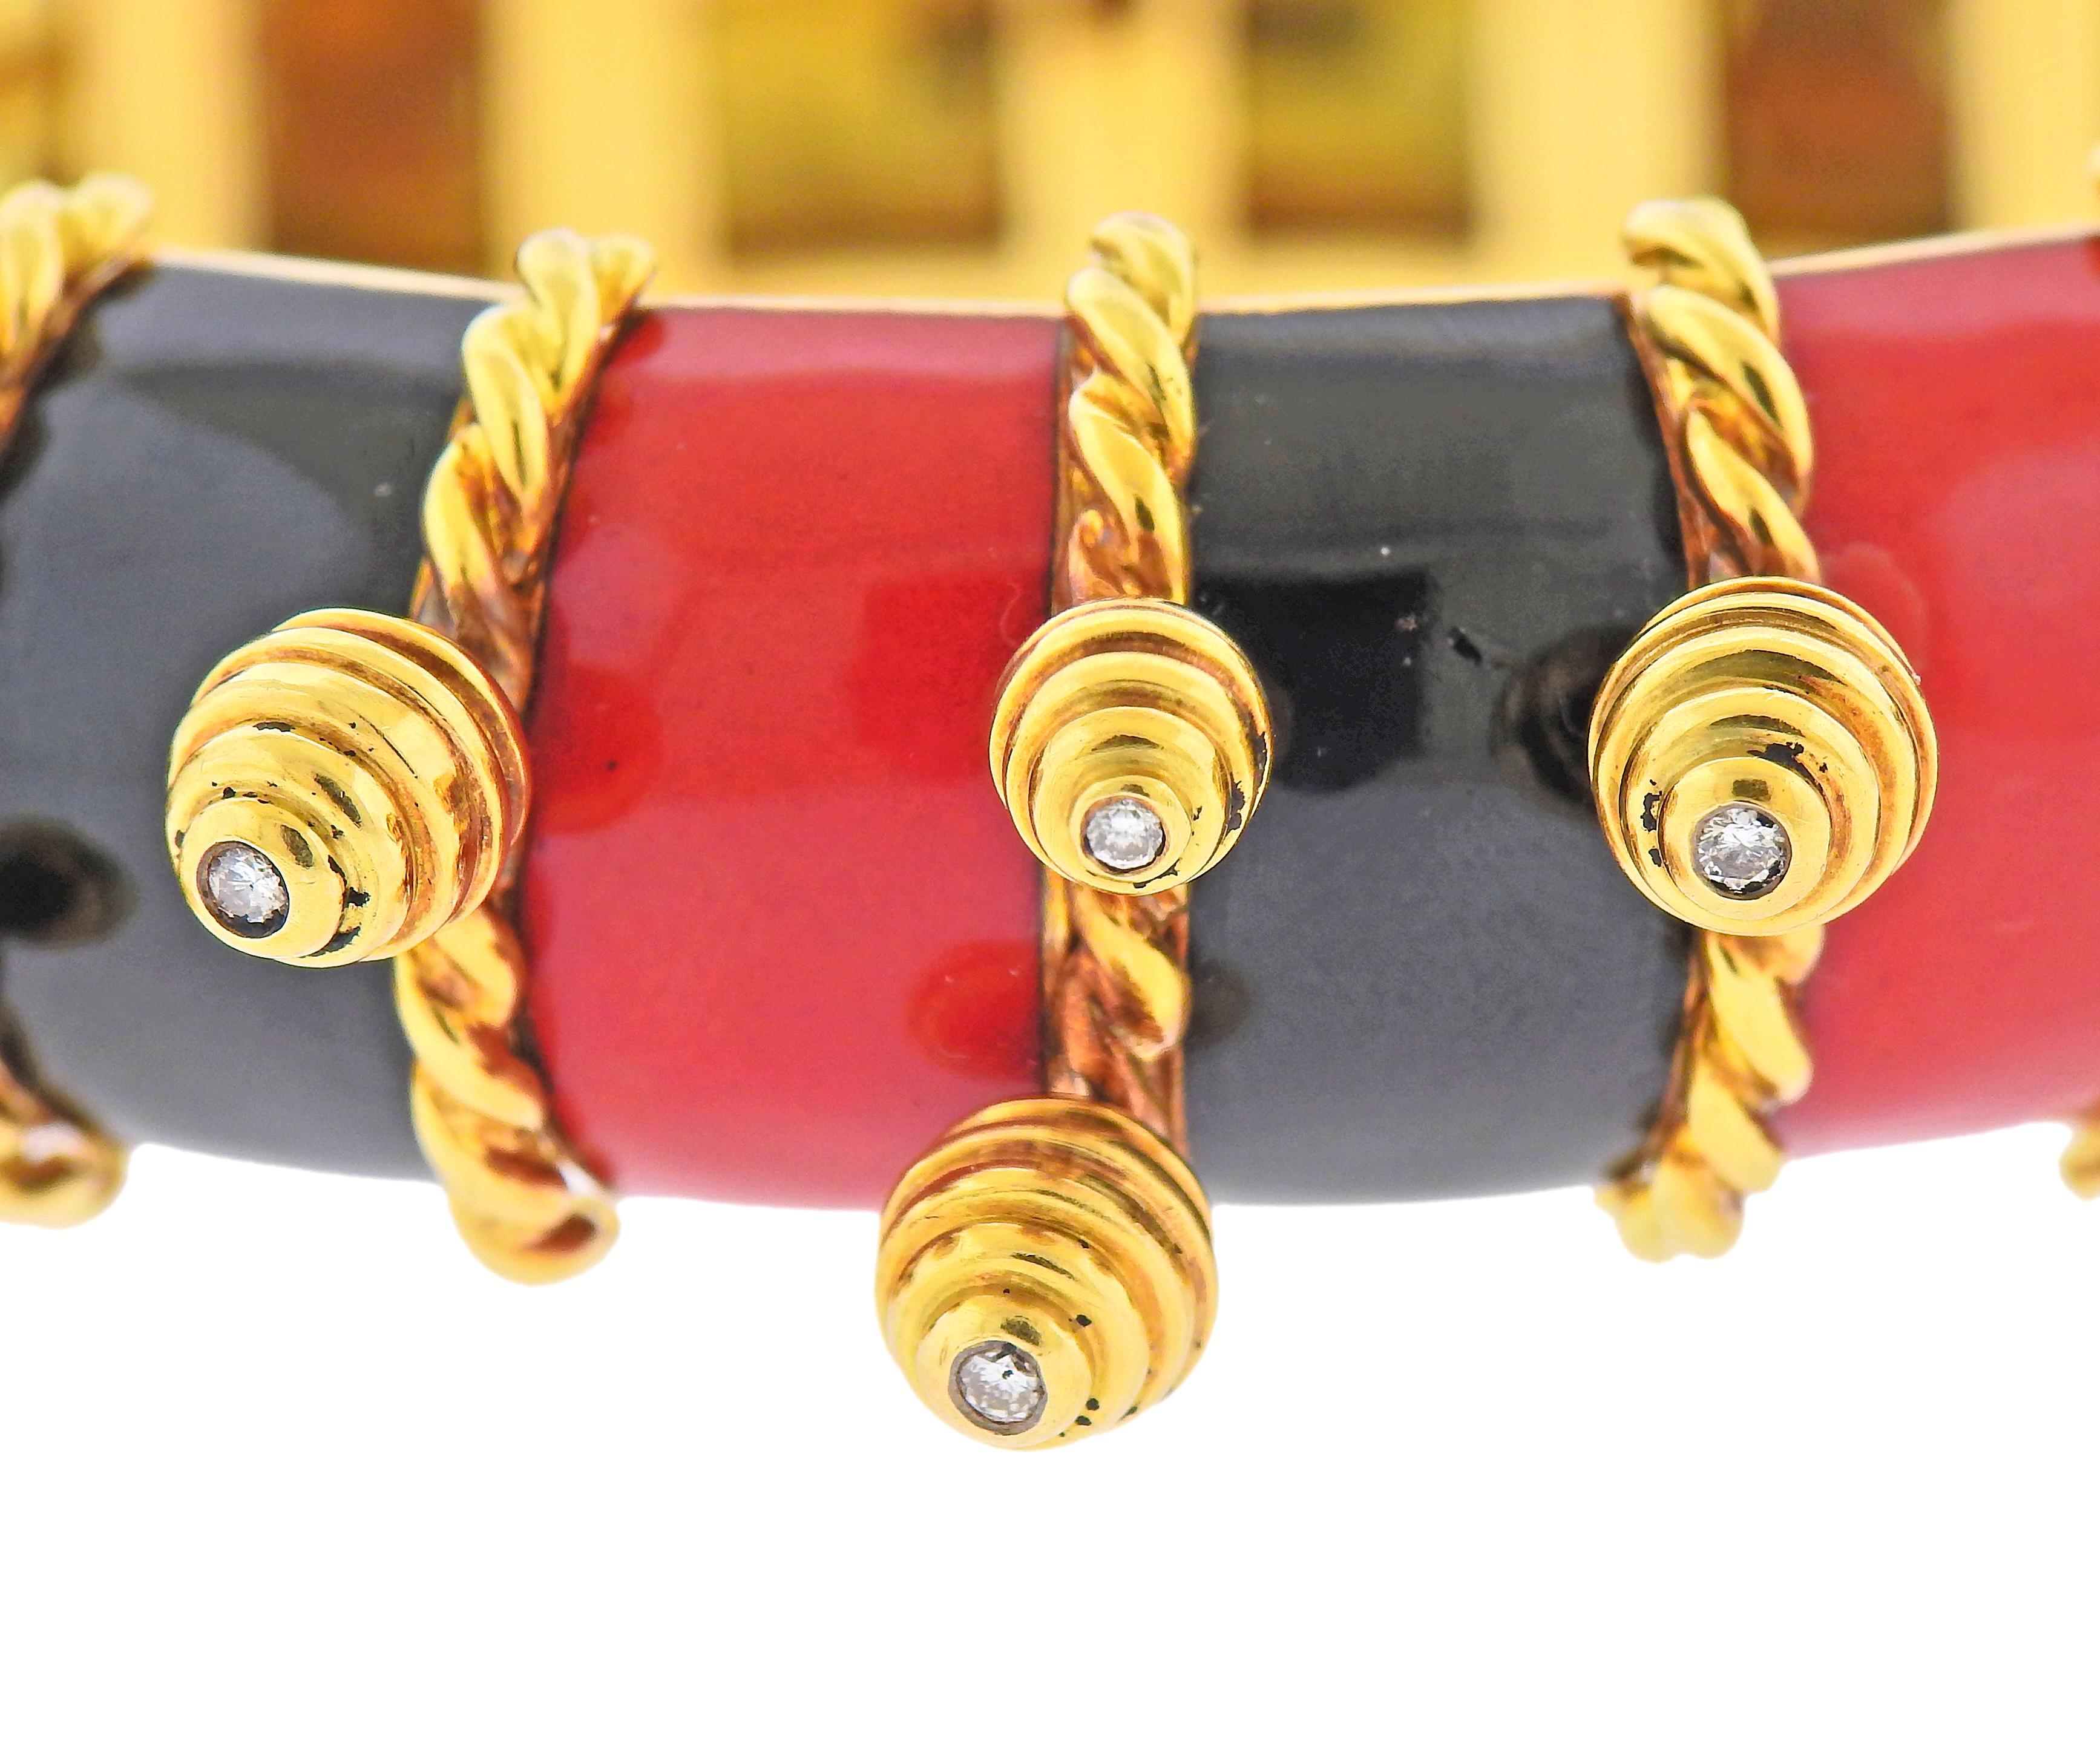 18k gold bangle bracelet with charms, each set with a diamond in the center. Bracelet decorated with black and red enamel. Will fit approx. 7.5